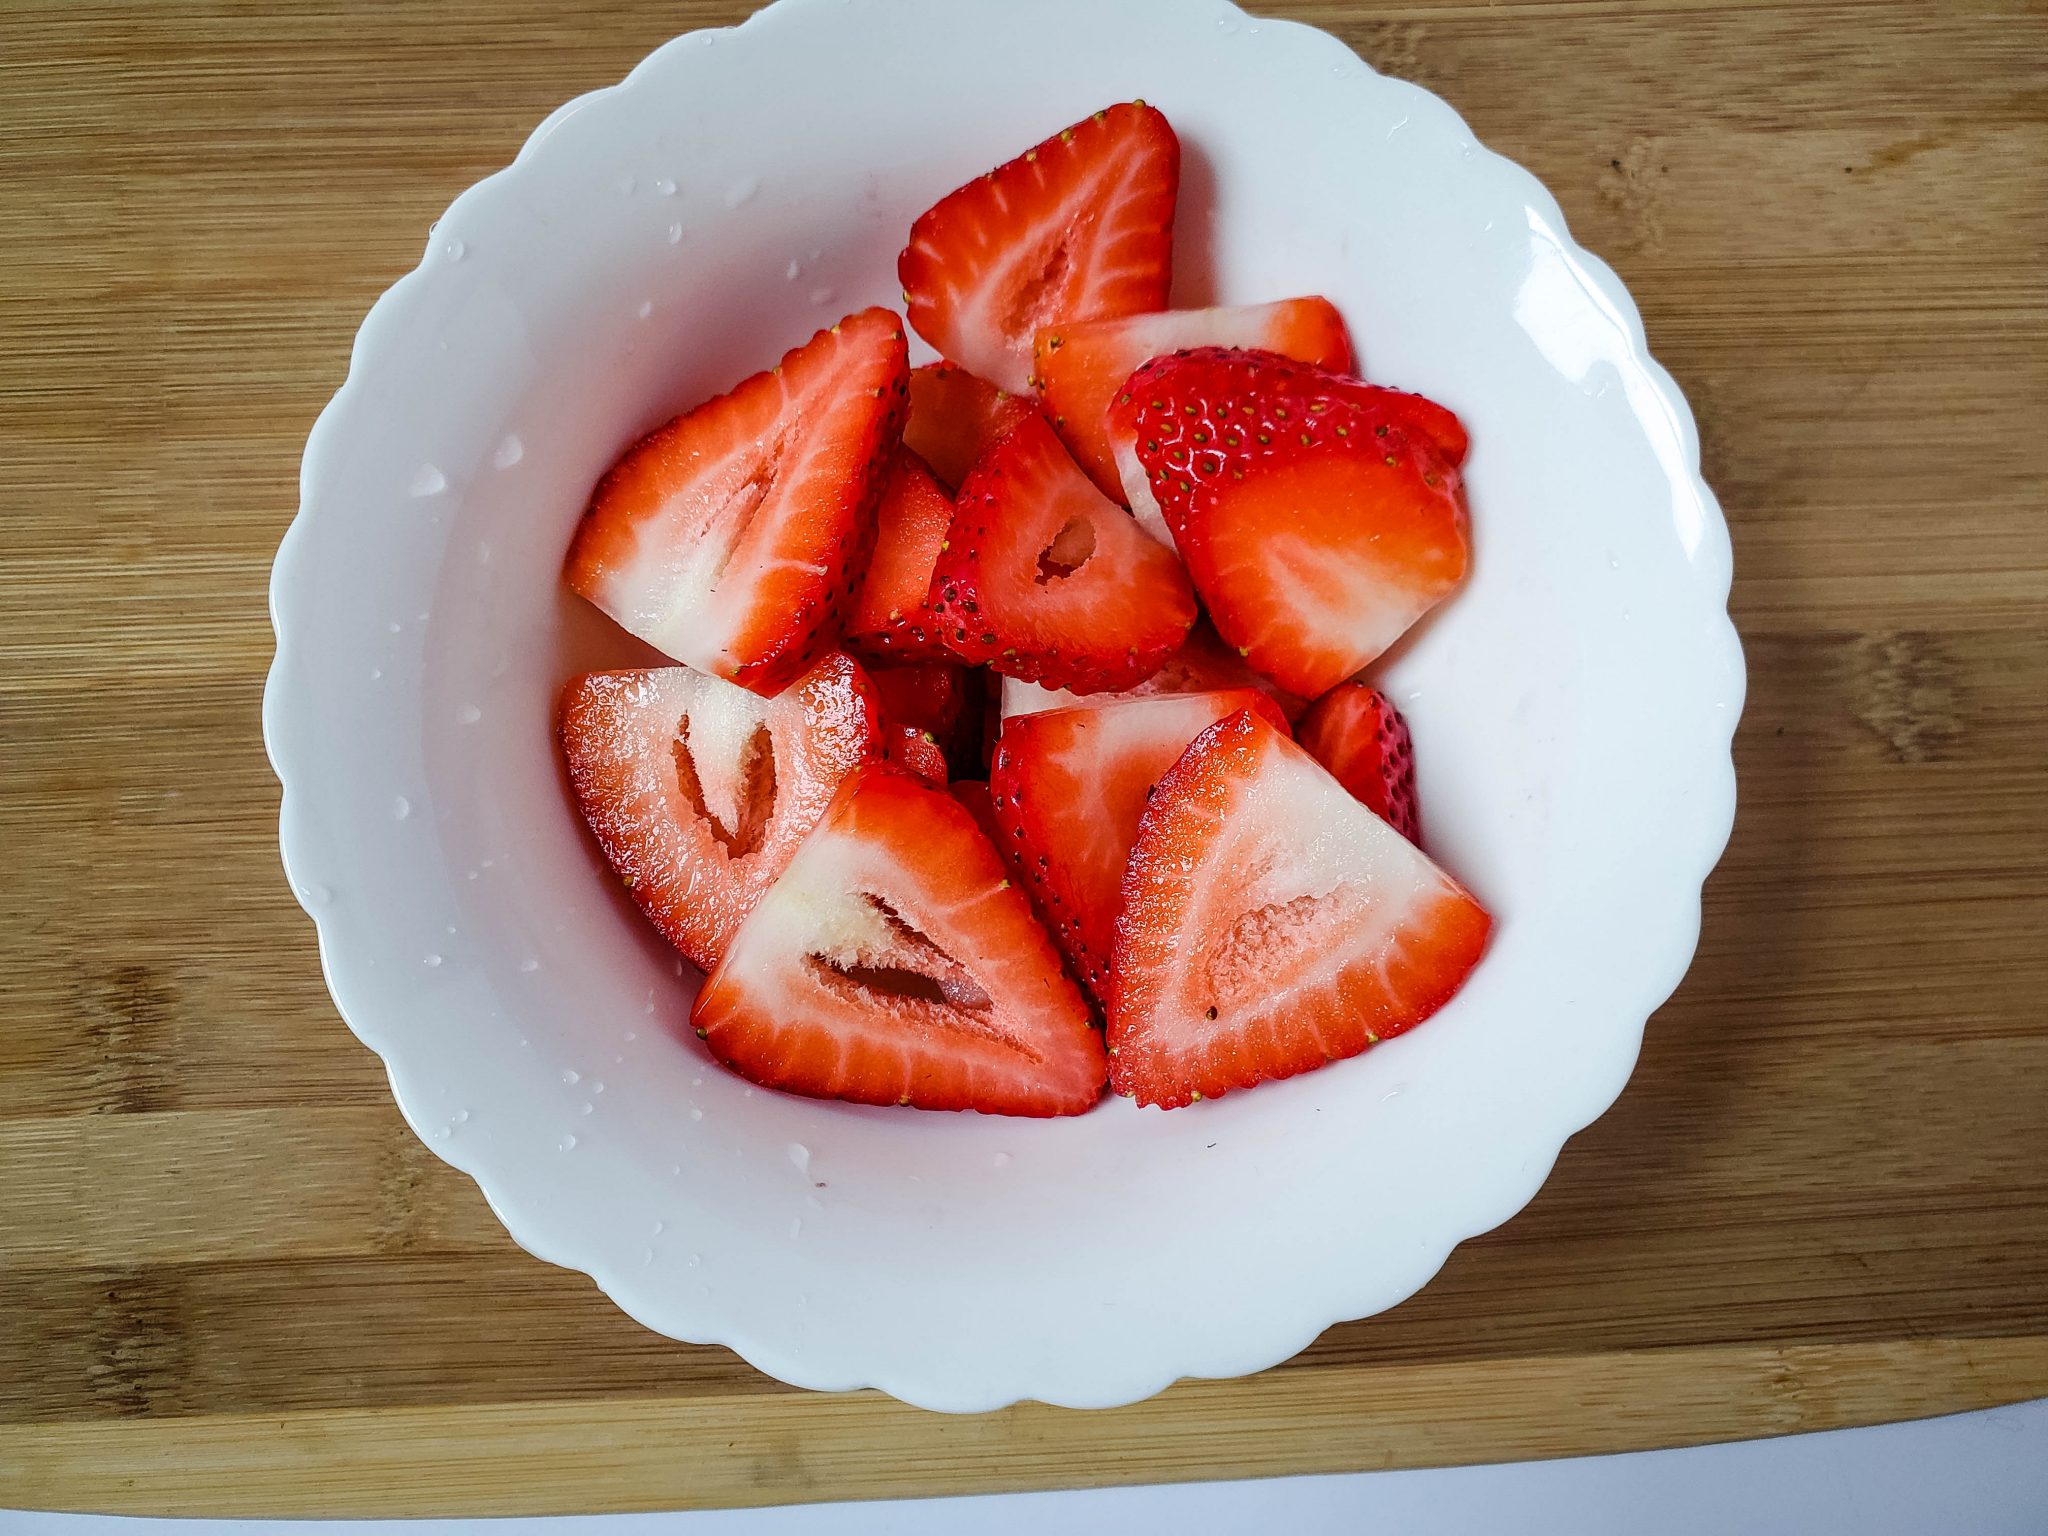 Slices of strawberries in a white bowl on a wood cutting board